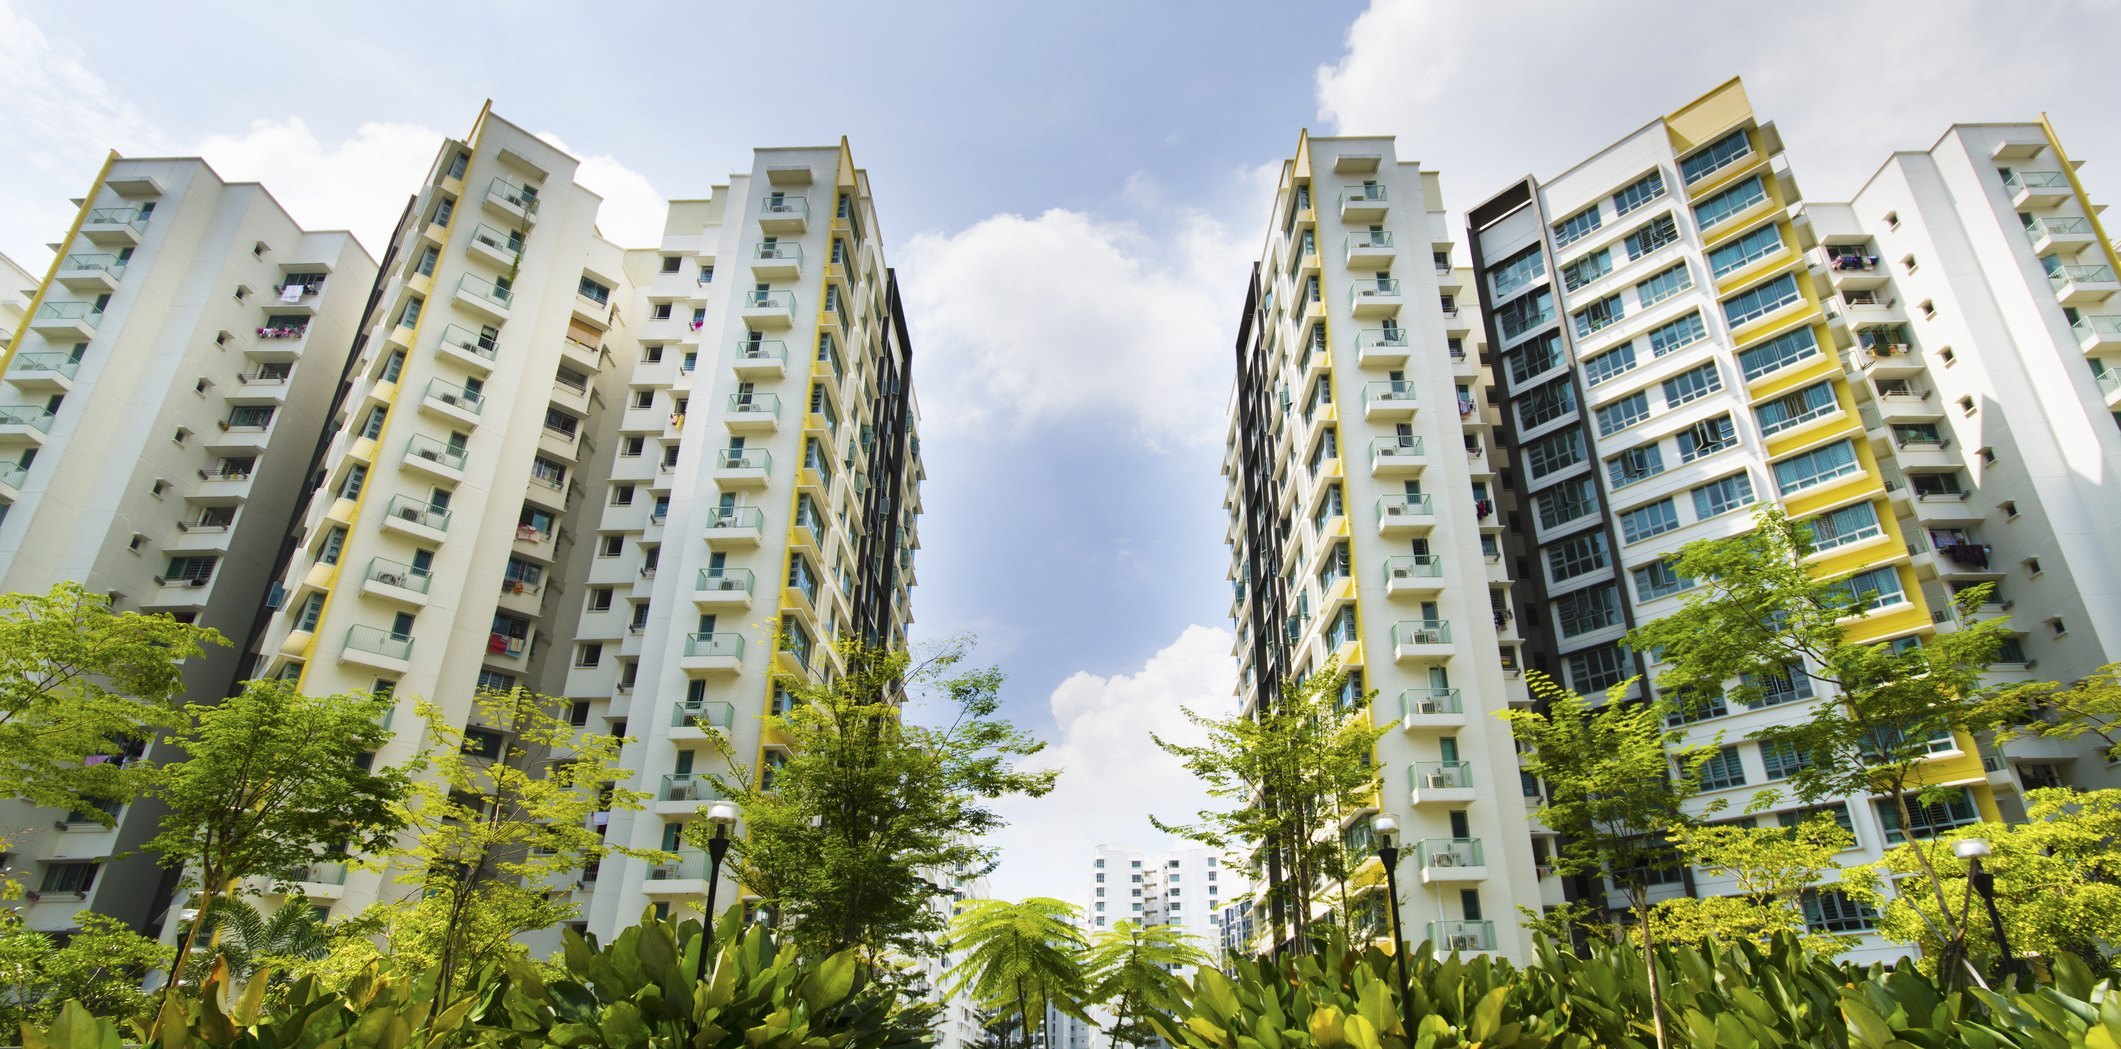 Applying for BTO flat? Here's what you should know first! 